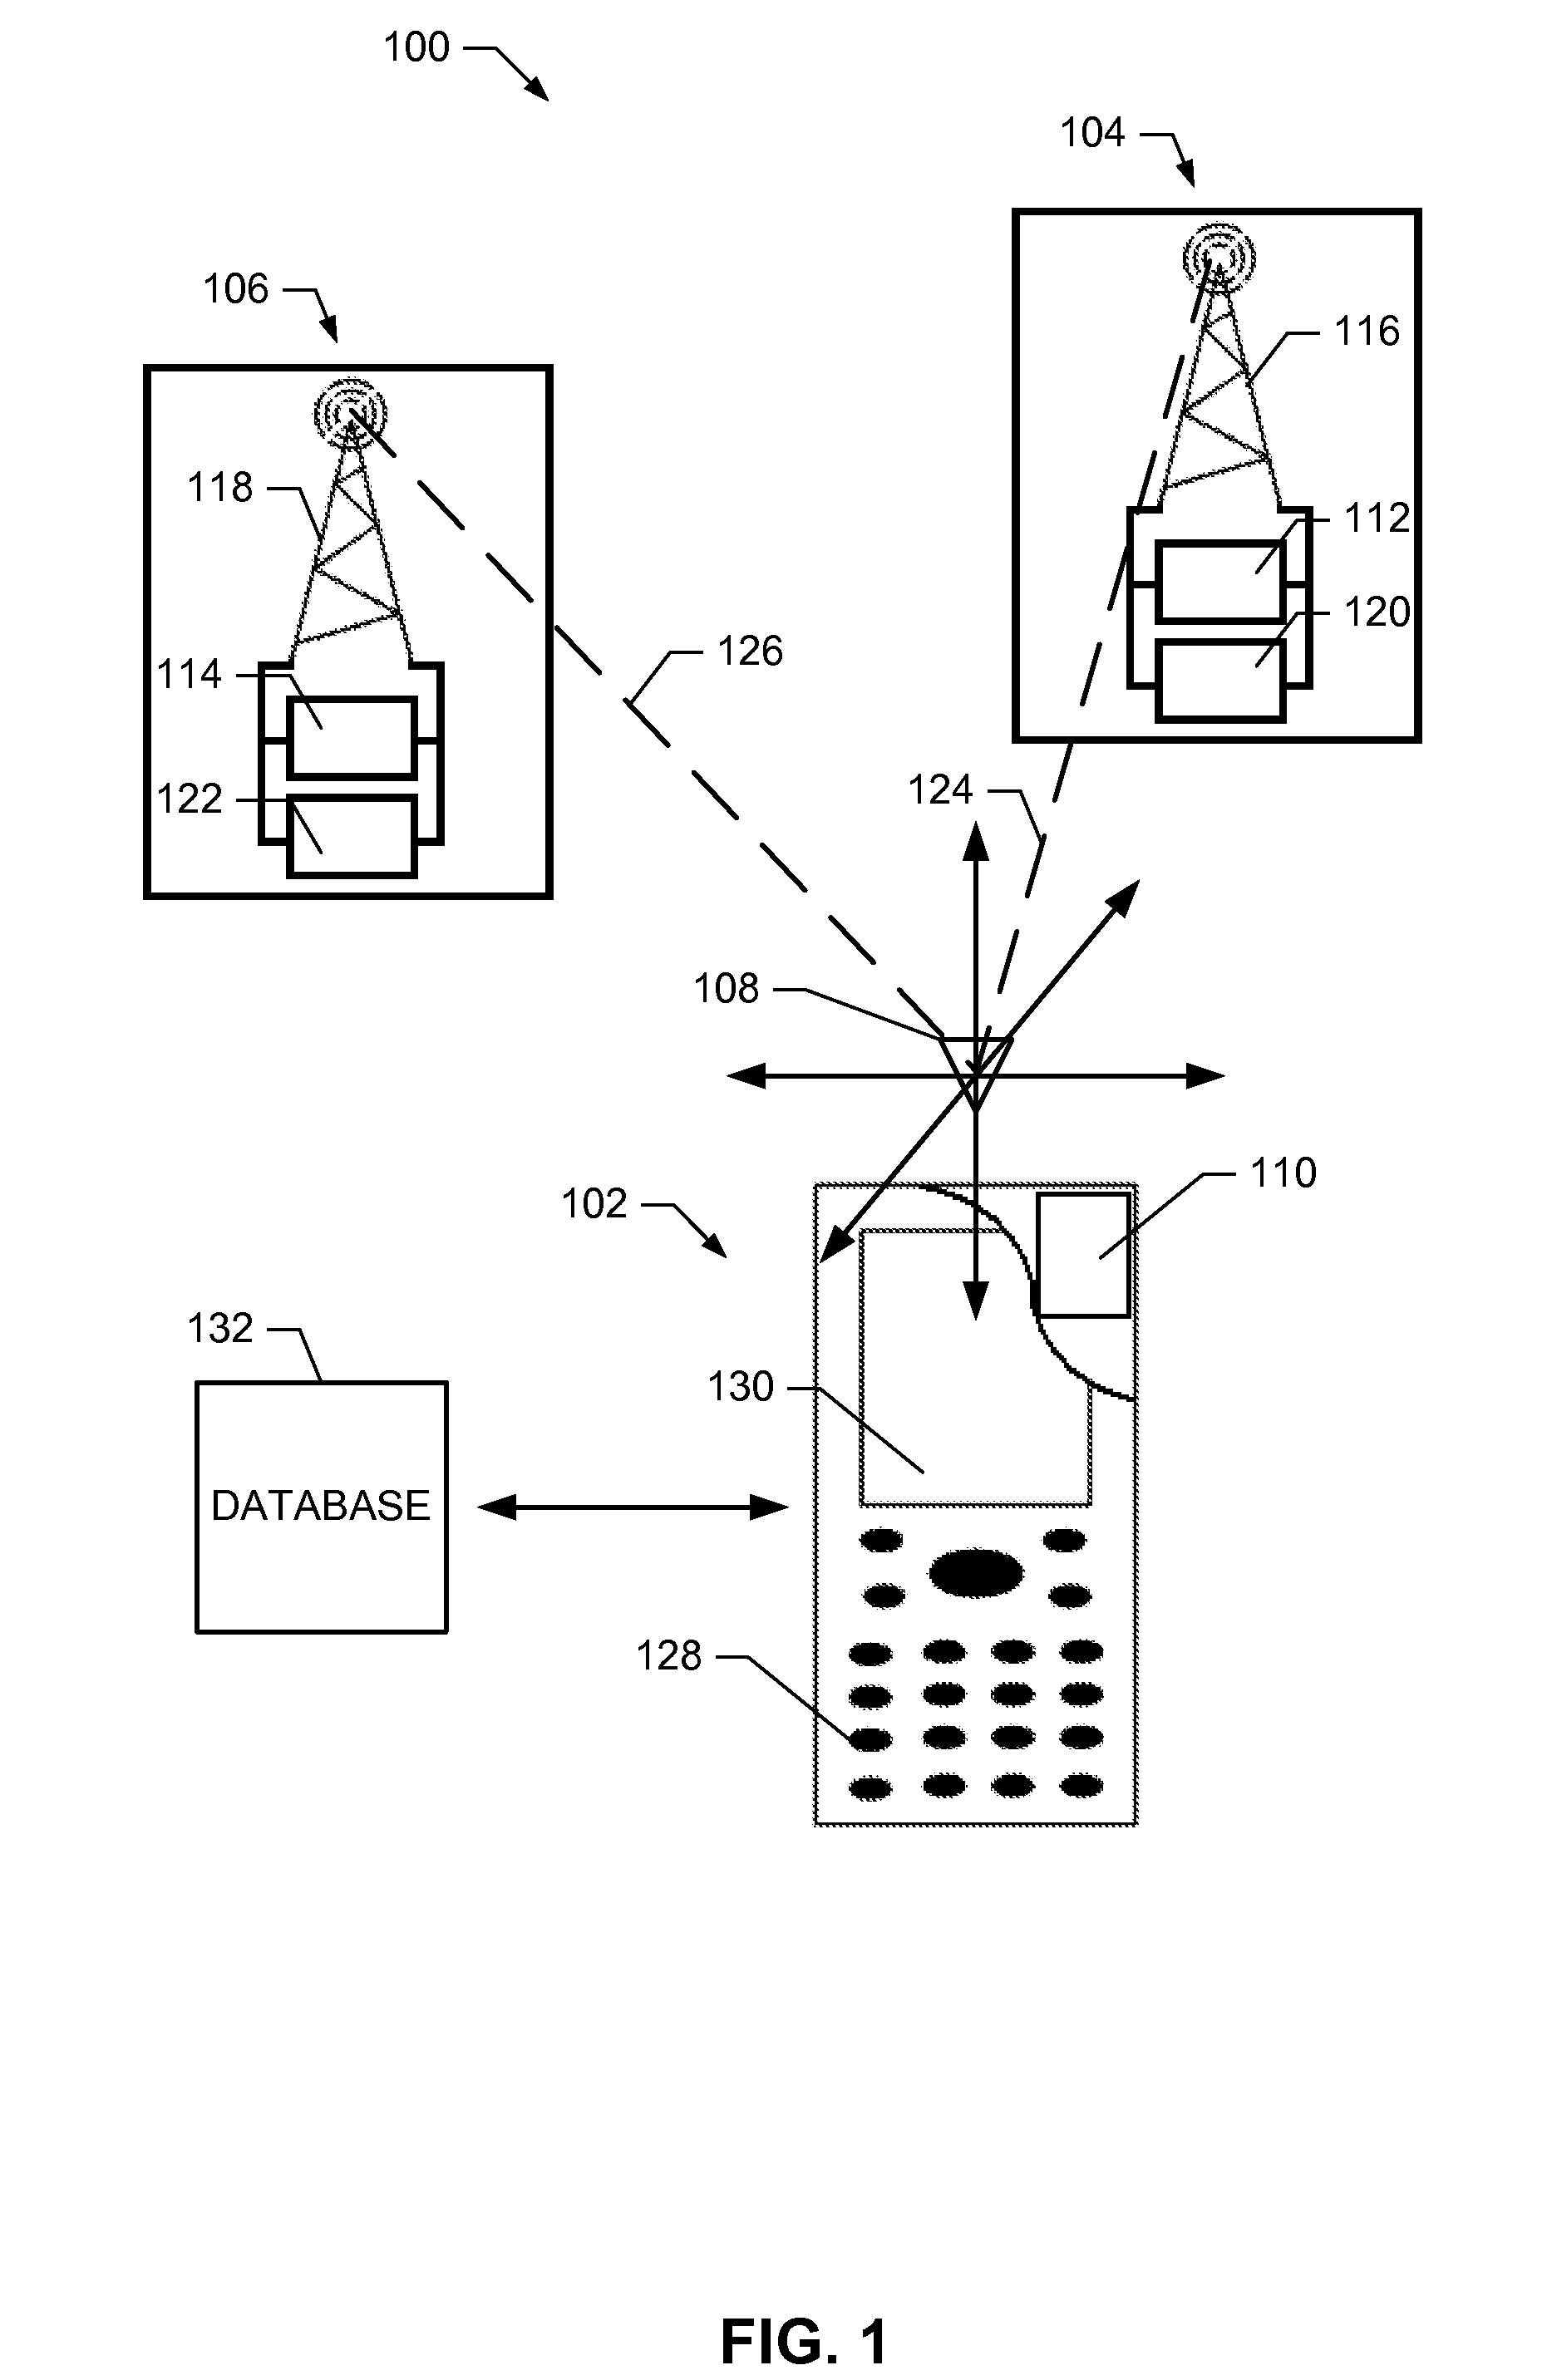 Methods and apparatus to visualize locations of radio frequency identification (RFID) tagged items